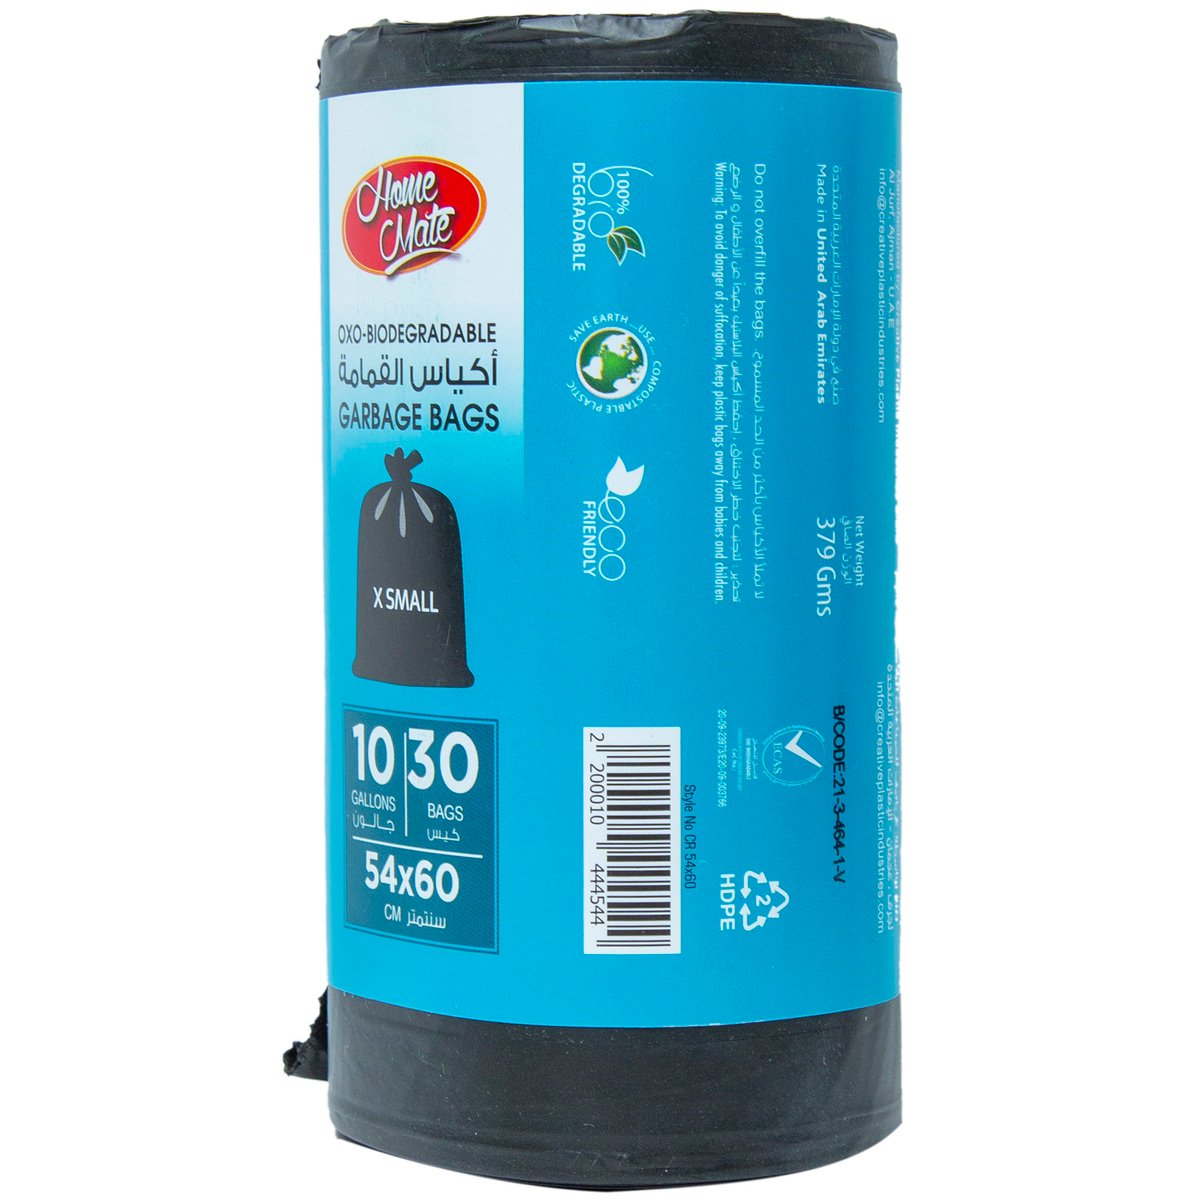 Home Mate Garbage Bags Oxo-Biodegradable 10 Gallons Size X-Small 54 x 60cm 30pcs